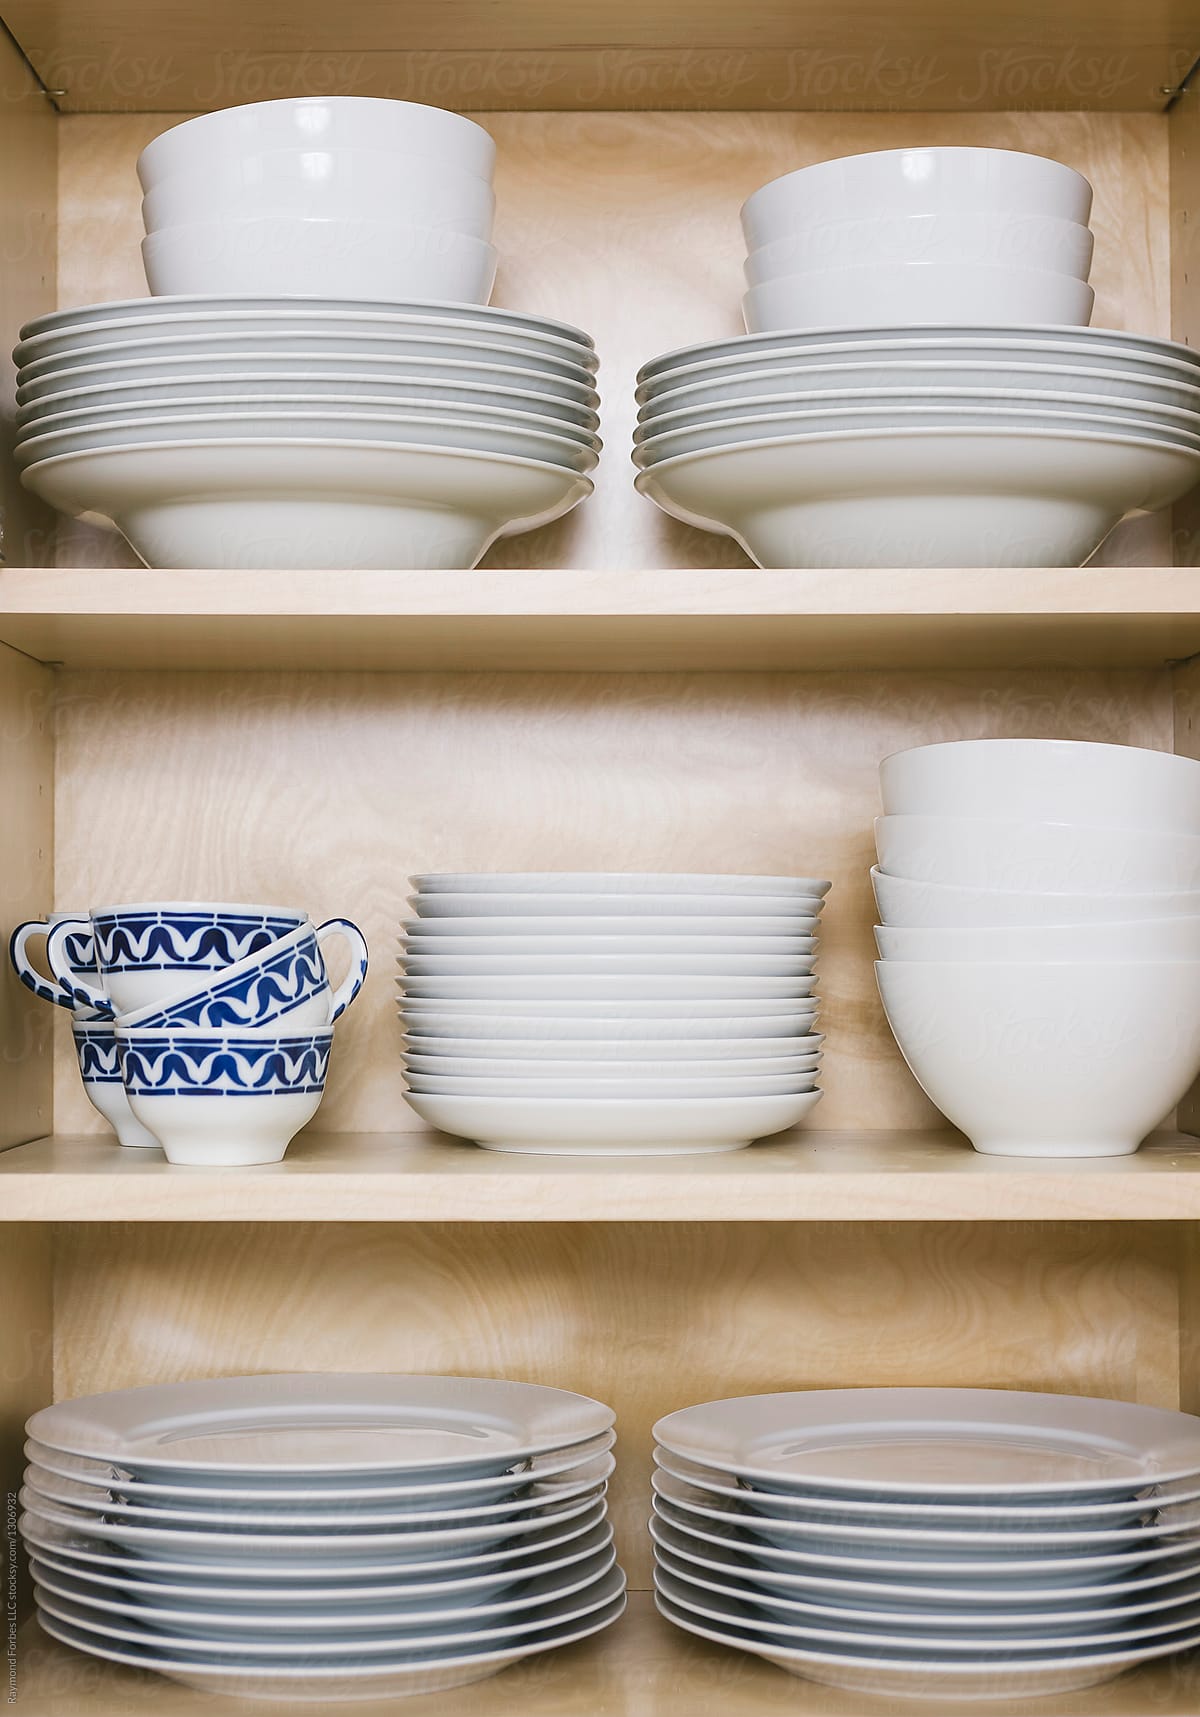 Kitchen Cabinet in home filled with dishes and bowls and plates